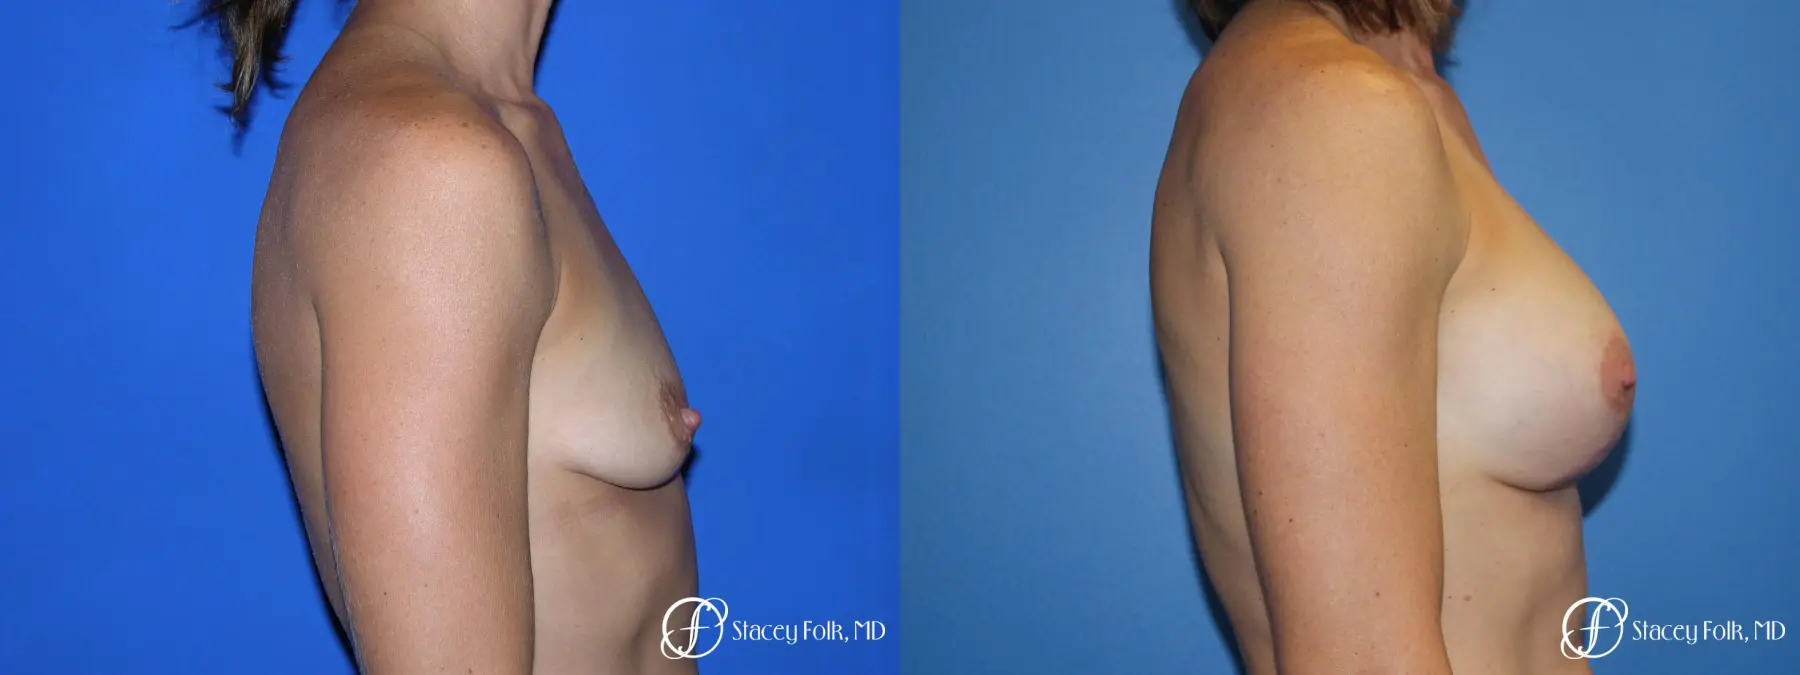 Denver Breast augmentation and breast lift (Mastopexy) 10091 - Before and After 5